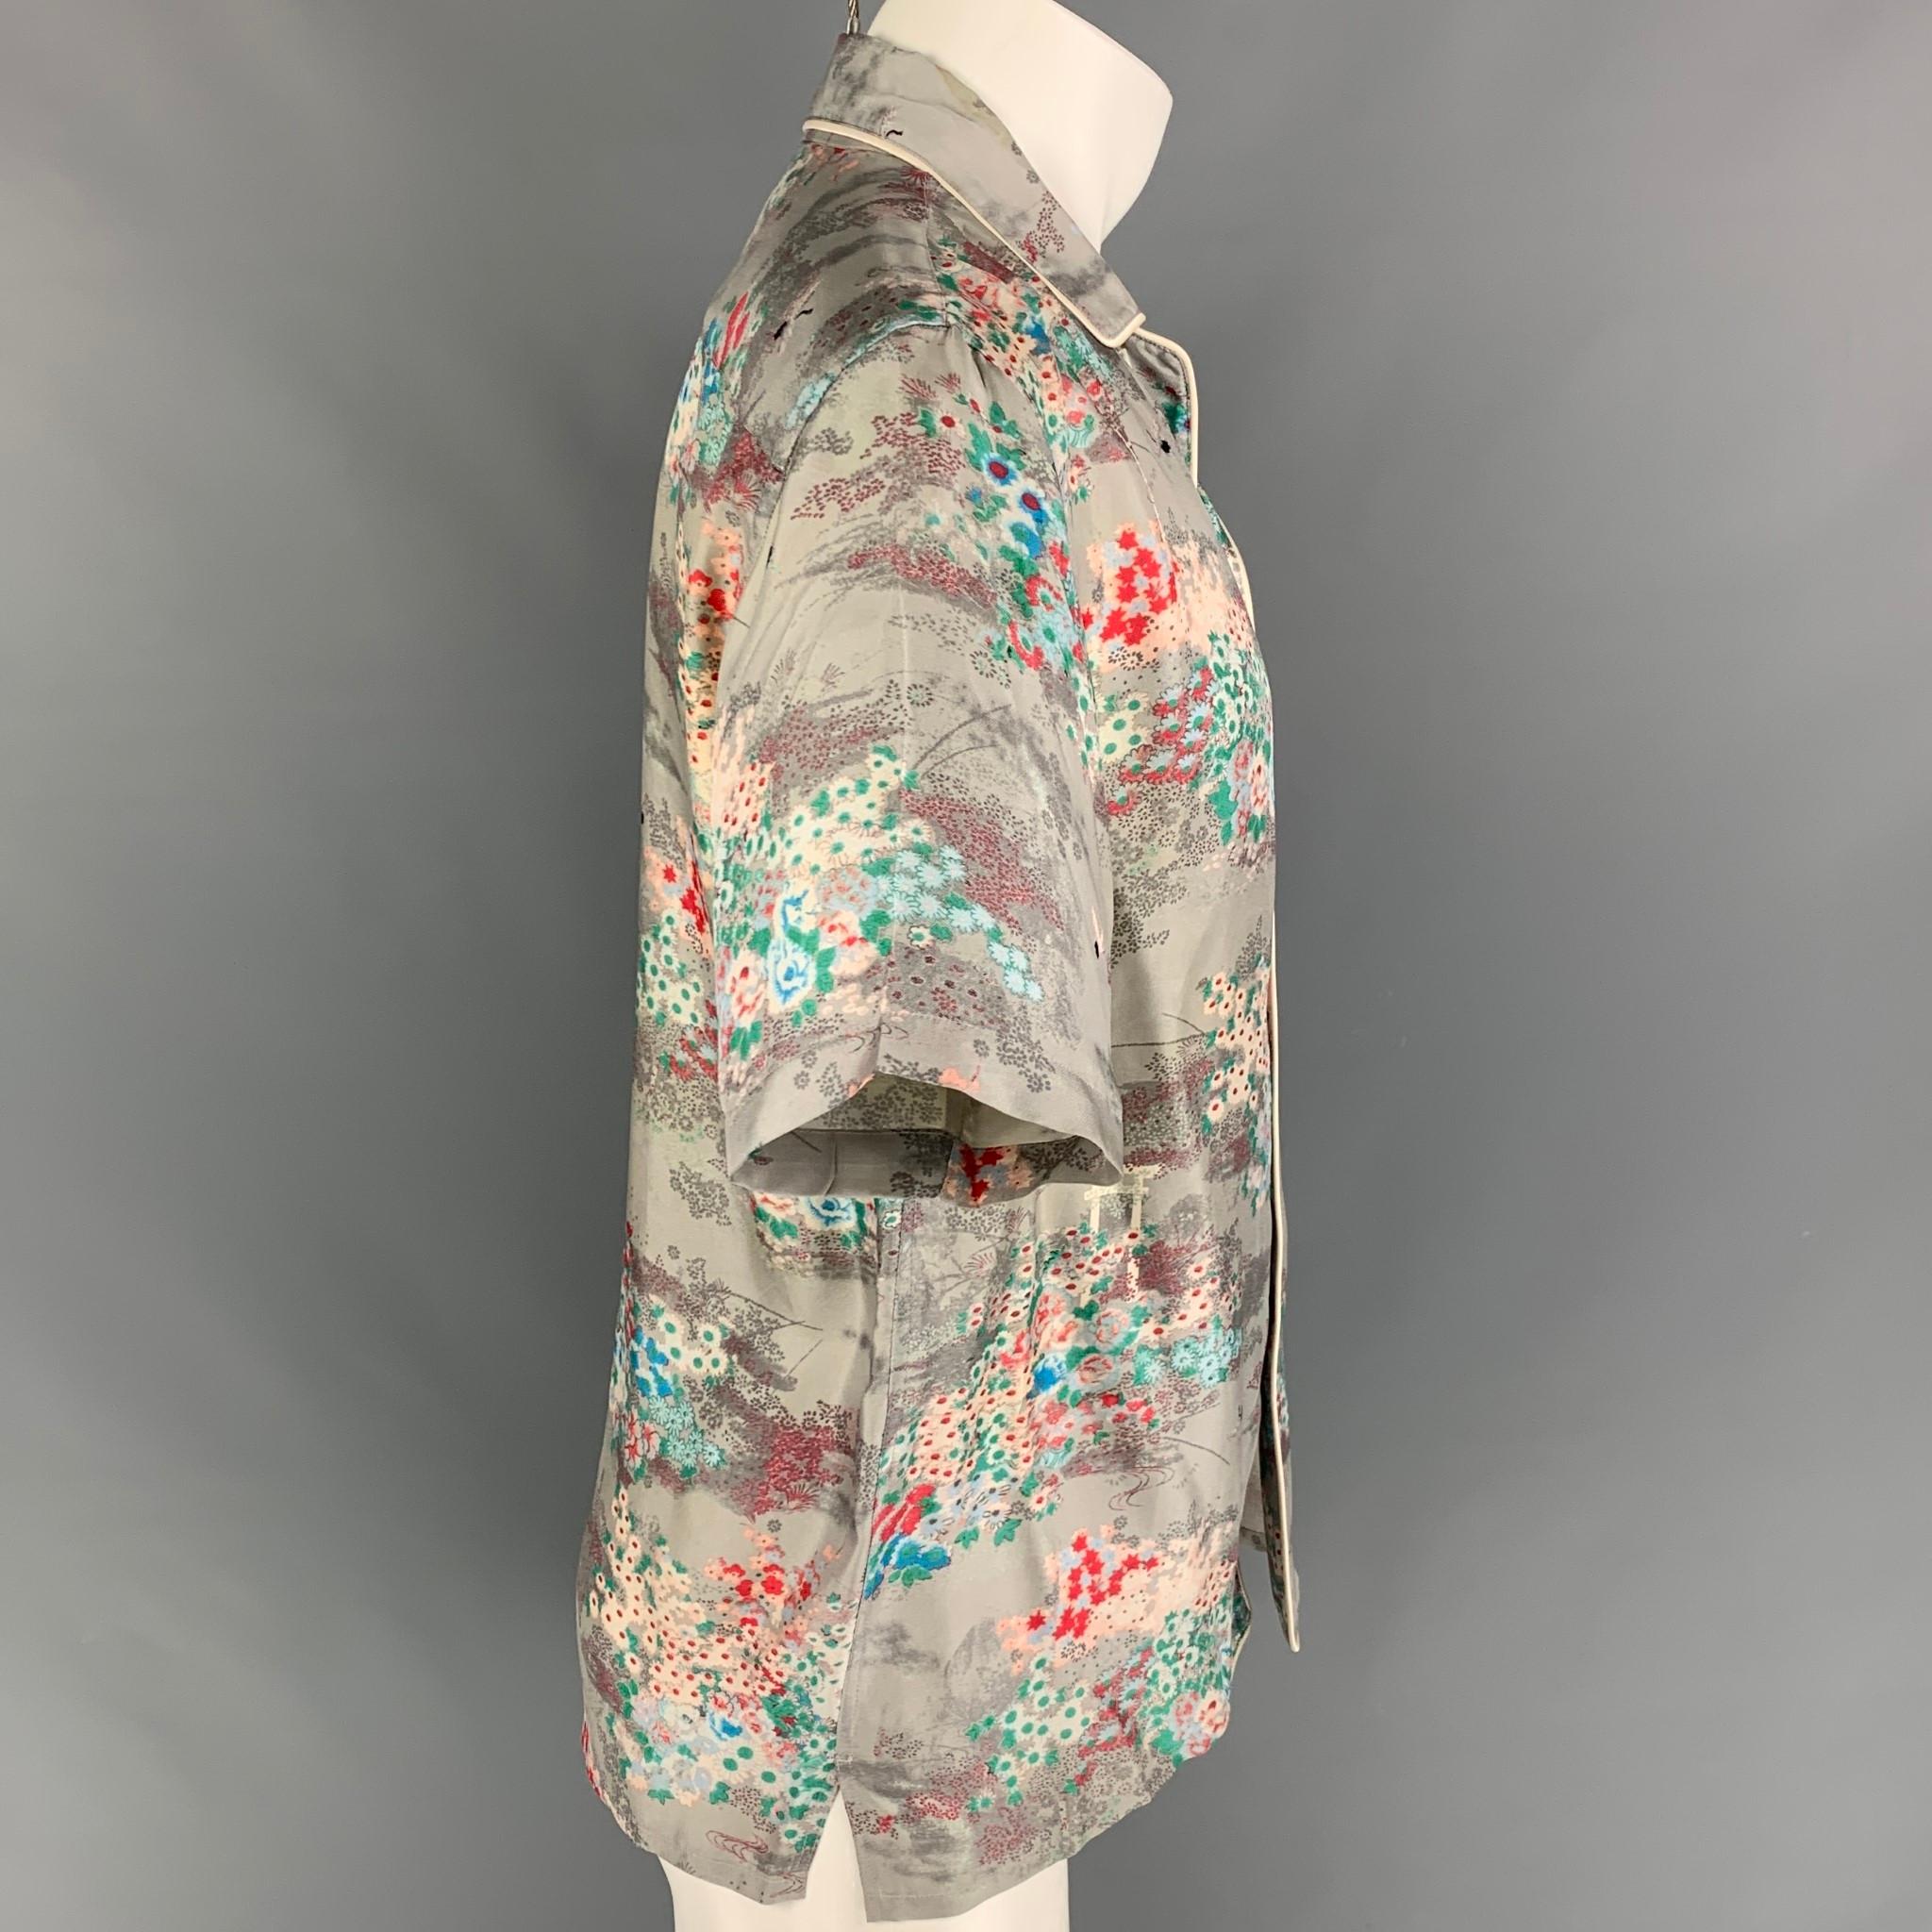 MARC JACOBS short sleeve shirt comes in a multi-color floral silk featuring a camp collar, front pocket, and a buttoned closure. Made in Italy. 

Good Pre-Owned Condition. Minor discoloration at front & neckline.
Marked: 48

Measurements:

Shoulder: